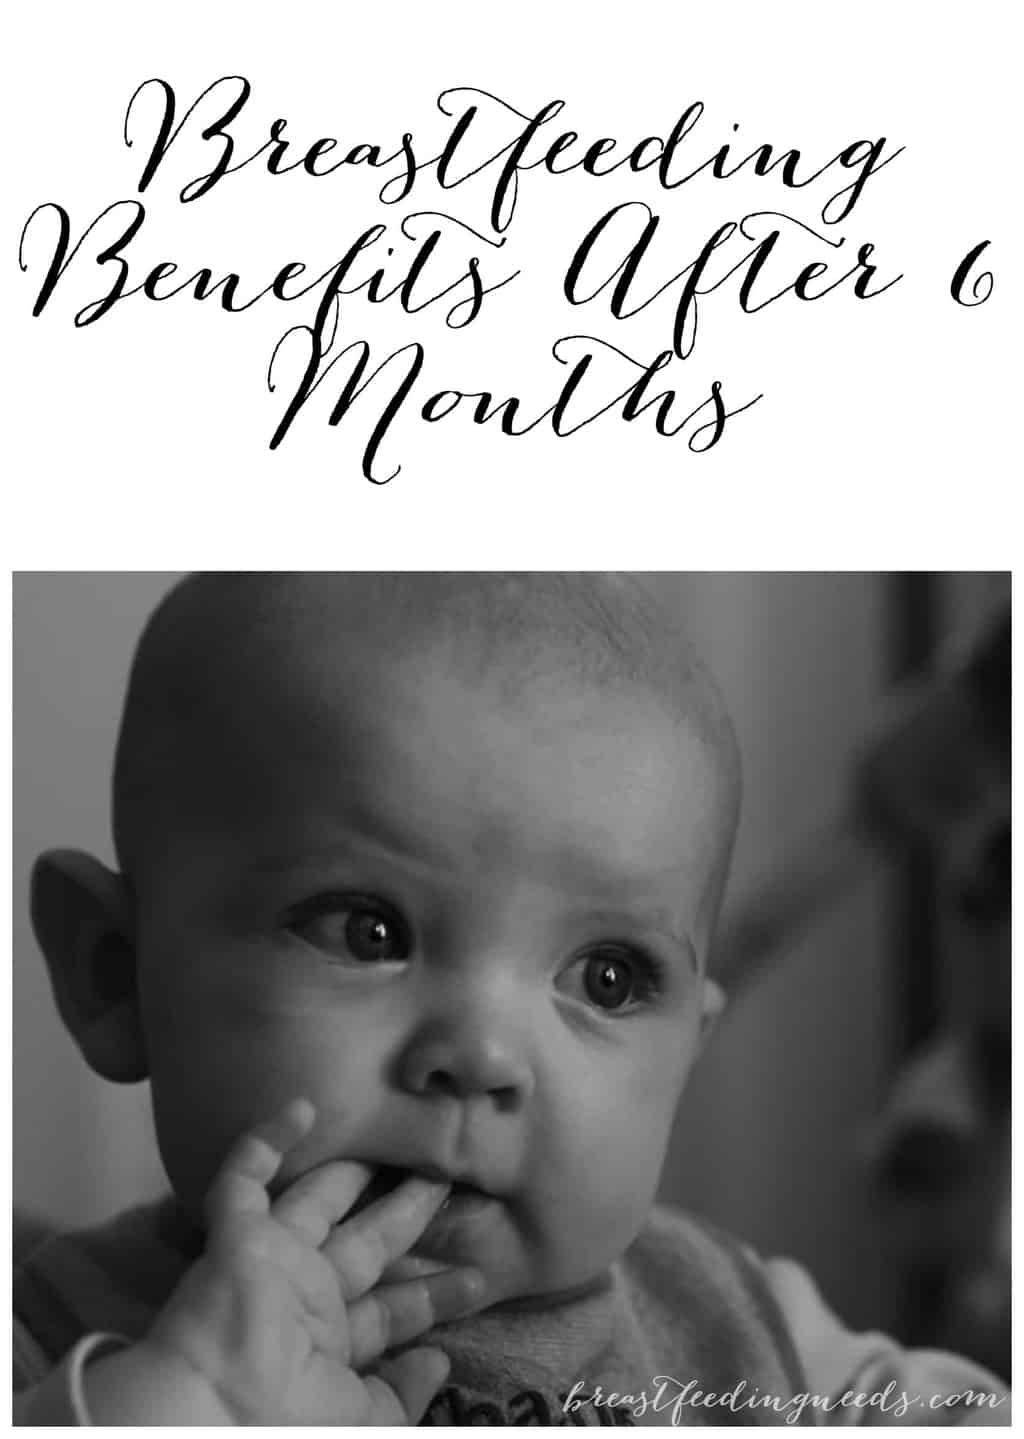 Benefits of breastfeeding after 6 months